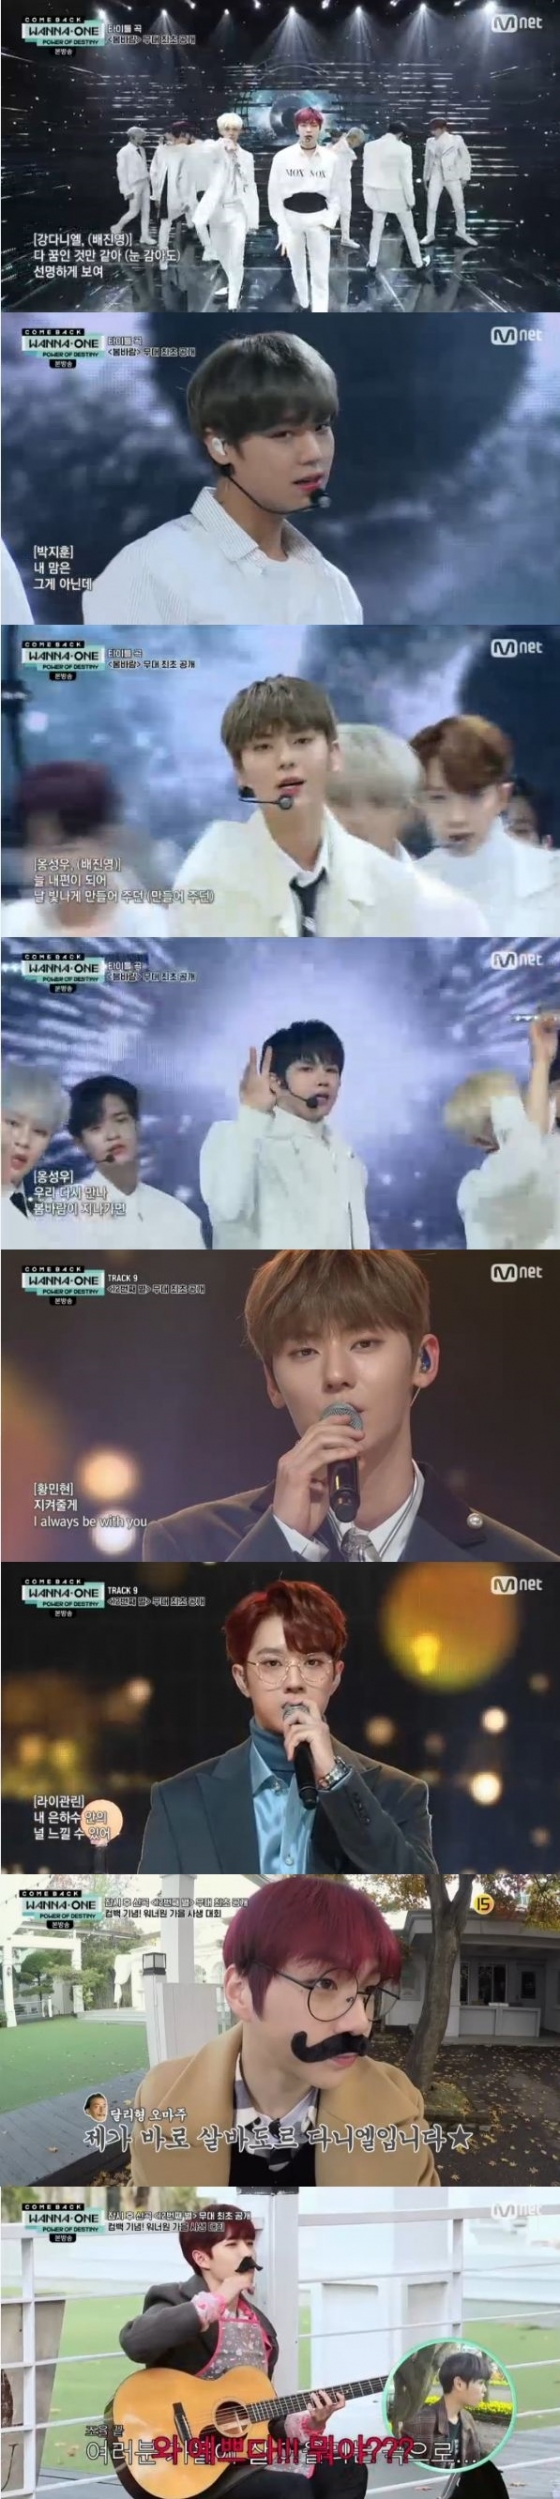 On the cable channel Mnet Wanna One comeback show: Power City of London Destiny (POWER OF DESTINY) broadcasted on the afternoon of the 22nd, Wanna One first released the songs Spring breeze and 12th Byul.Wanna One showed off her pure charm in all-white costumes on the stage of the song Spring Breeze; the members refreshing voice and sword dance were outstanding.Spring freeze is a song about the heart of one Wanna One member in a sad but beautiful story on an emotional melody.Wanna One also performed a sentimental voice with the song 12th Byul; each of them wore achromatic costumes and sang love for fans.12th Byul is a song that has always written the heart of Wanna One, which will not change forever, and the gratitude for the 12th member Wannable (fandom).Wanna One also held an autumn contest outdoors, and Hwang Min-hyun came out with a beard on his face and laughed, saying, I am Hwang.Kang revealed confidence that he was Salvador Daniel.Later, they painted the theme of Power City of London Destiny. Kim Jae-hwan suddenly played the guitar, saying he would inspire him.But the members were not interested in anyone.Bae Jin-young painted a field of cherry blossoms. He looked at the members, saying, Its cool. Park said, I think the camp is a little bit middle of two bottles.Kim Jae-hwan painted a black tree in a dark background, saying, The leaves are out, but there is a sun like our fateful fans.On the other hand, Wanna One made a comeback with her first full-length album Power City of London Destiny (POWER OF DESTINY) on the 19th.